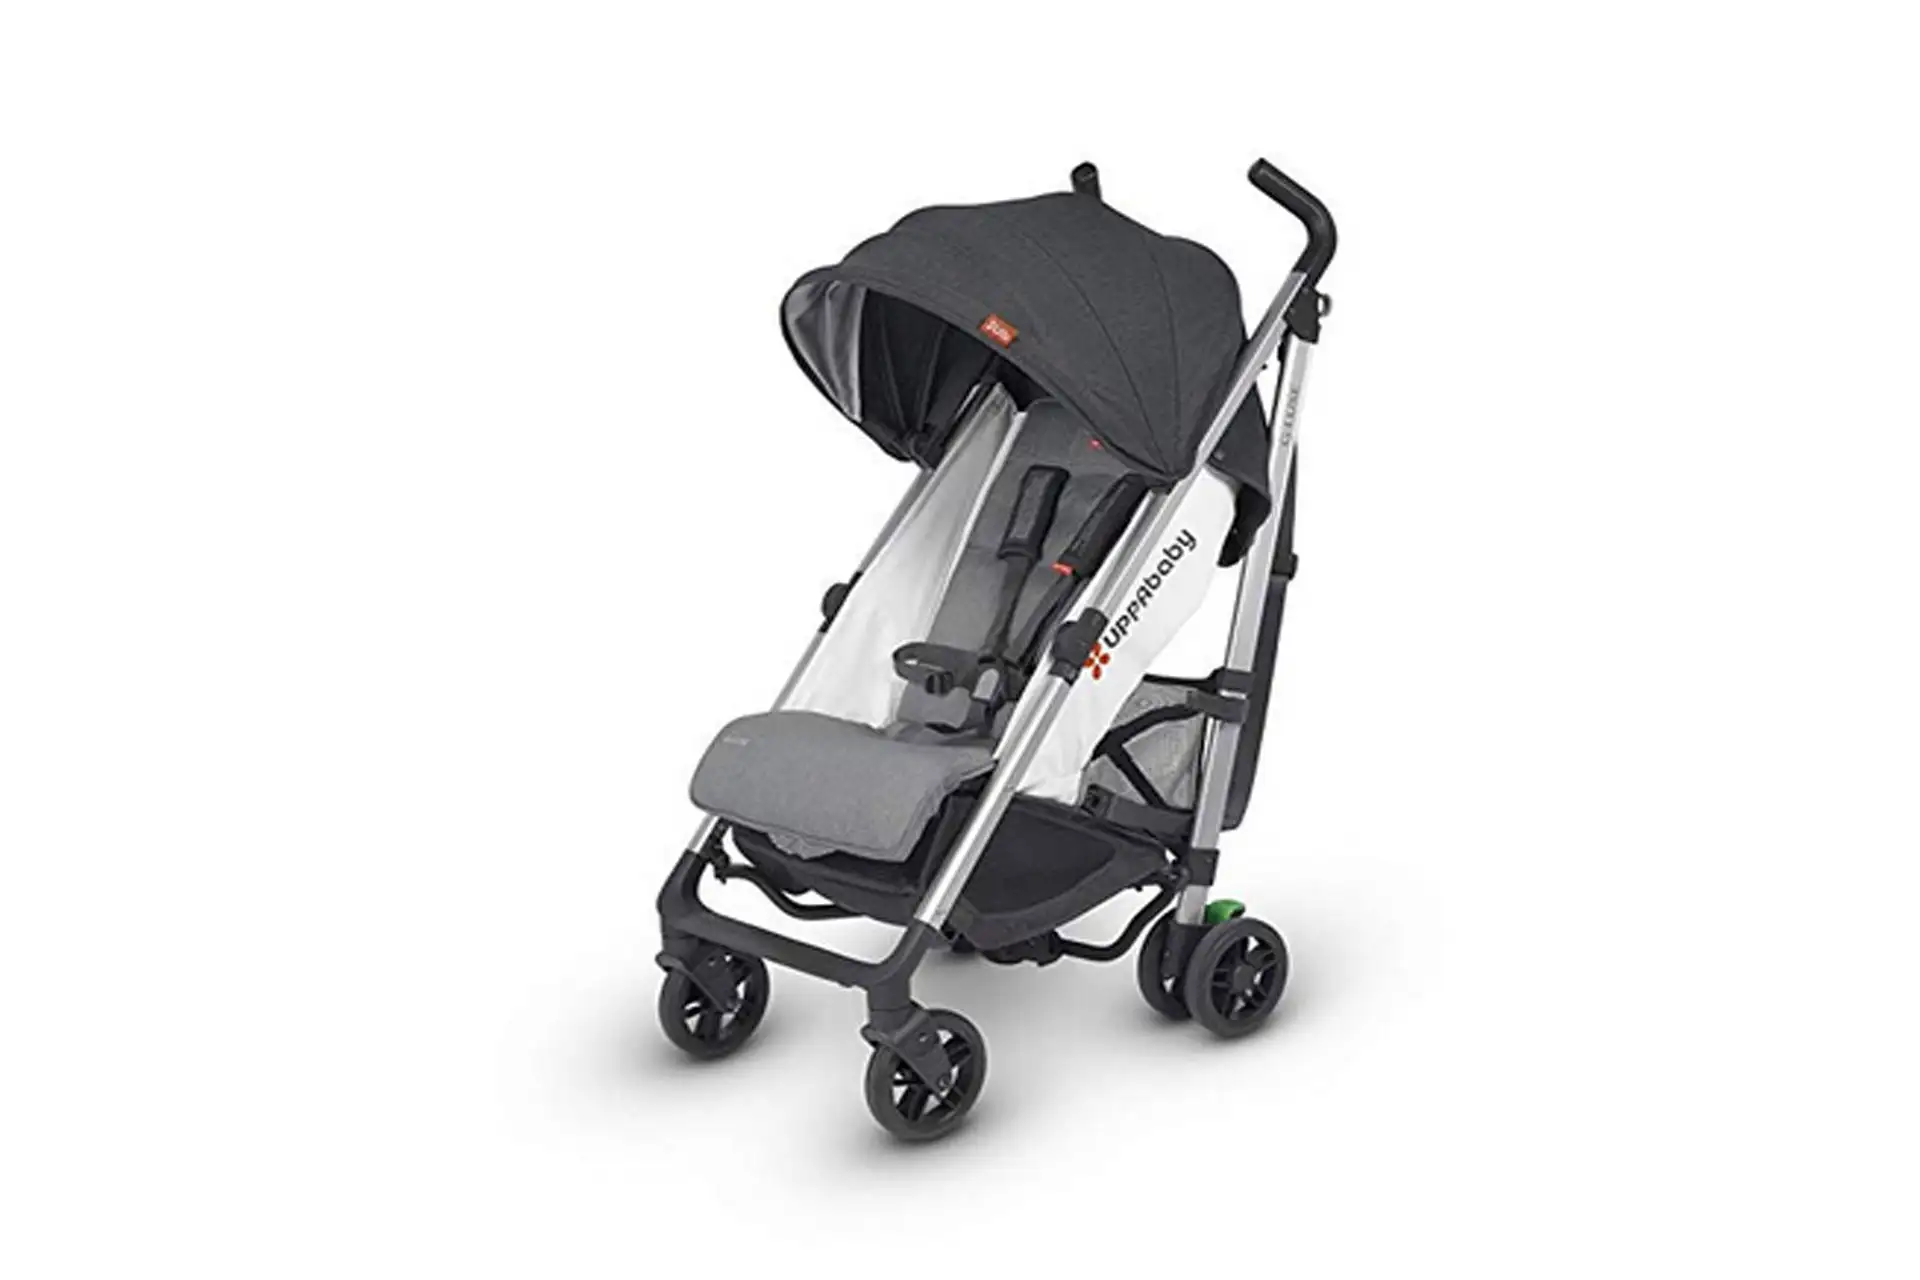 UPPAbaby G Luxe; Courtesy of Amazon